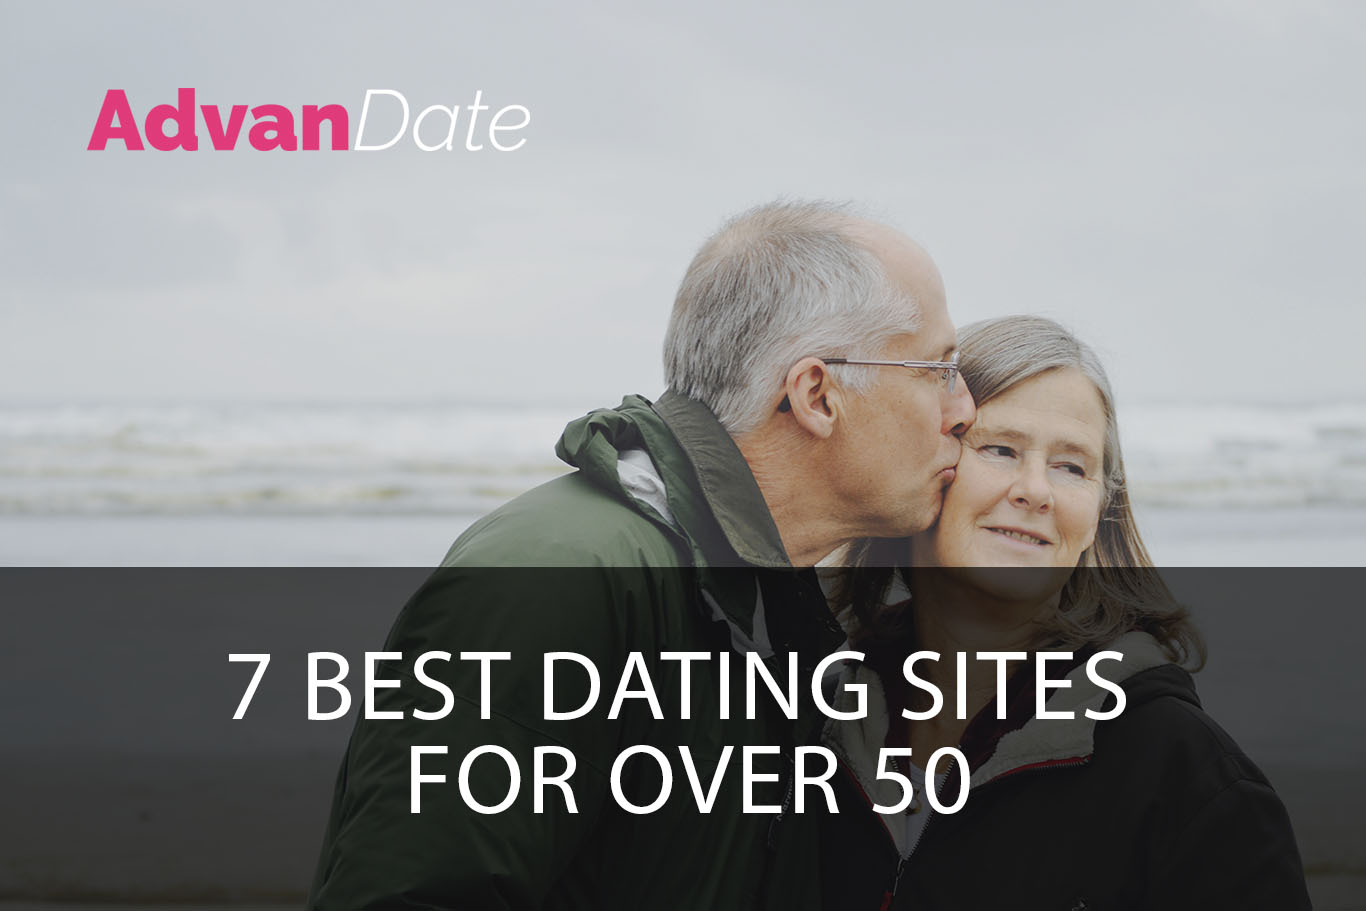 The Best Dating Sites For Over 50